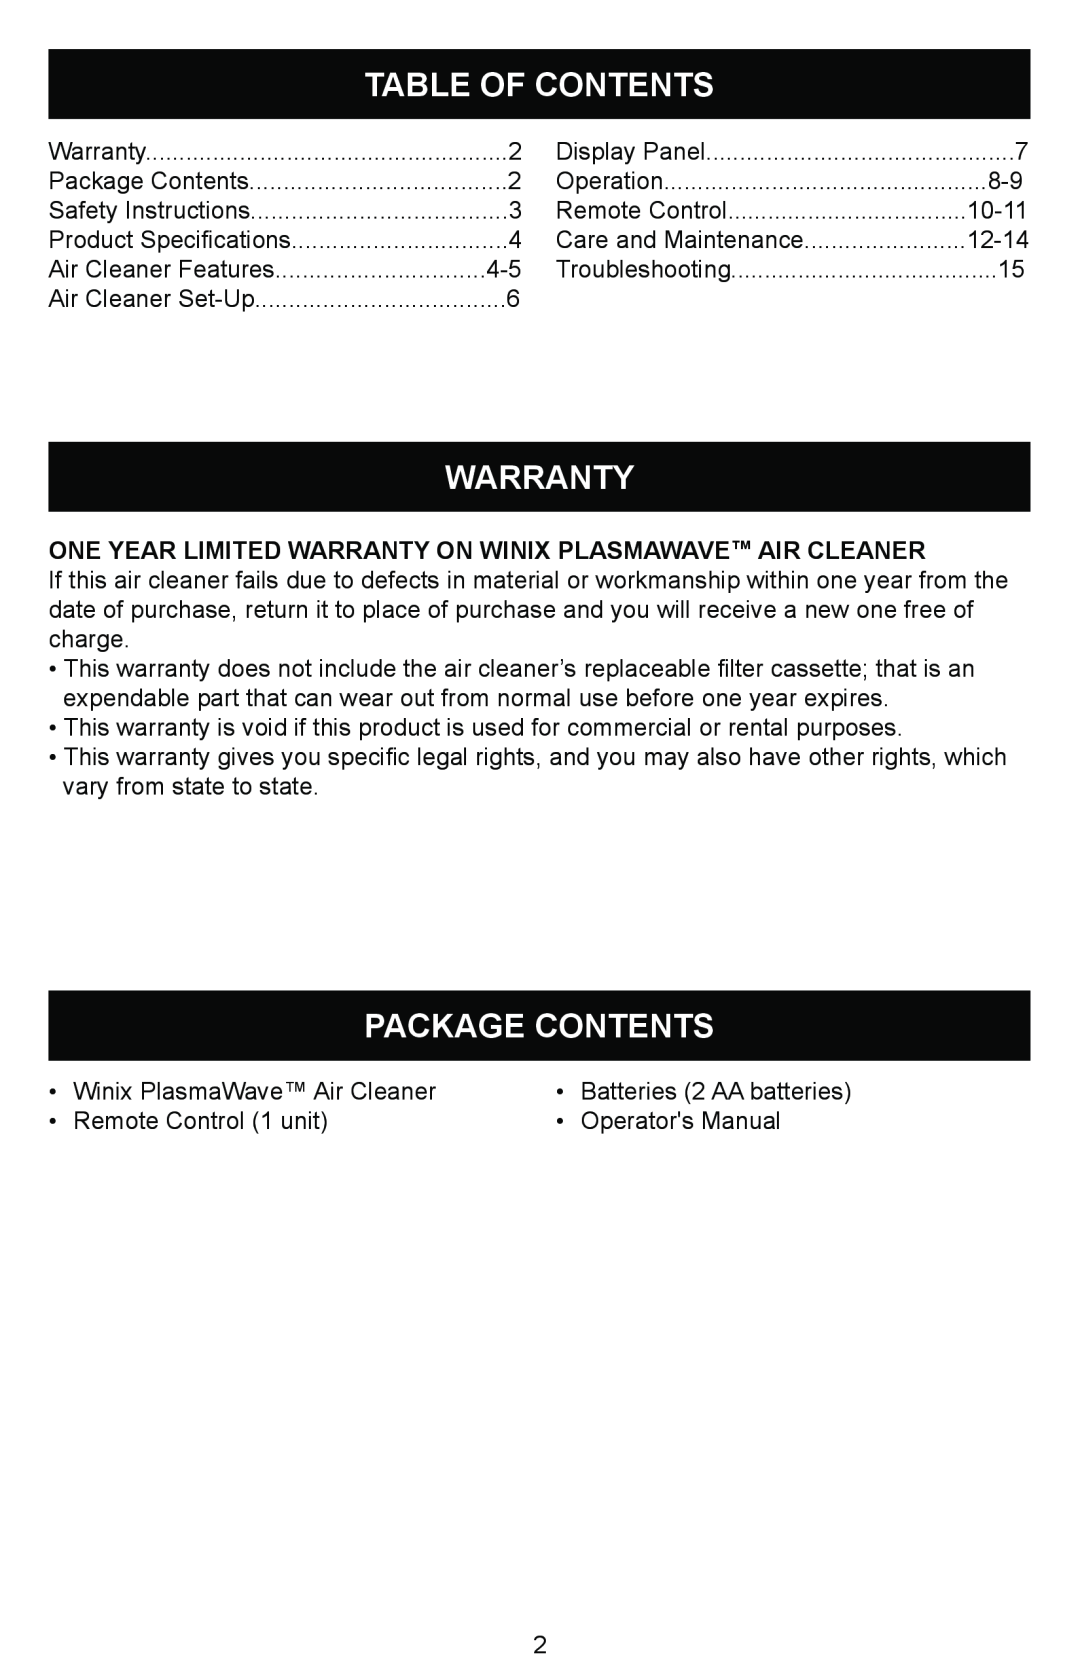 Winix WAC-9000 warranty Table Of Contents, Warranty, Package Contents 